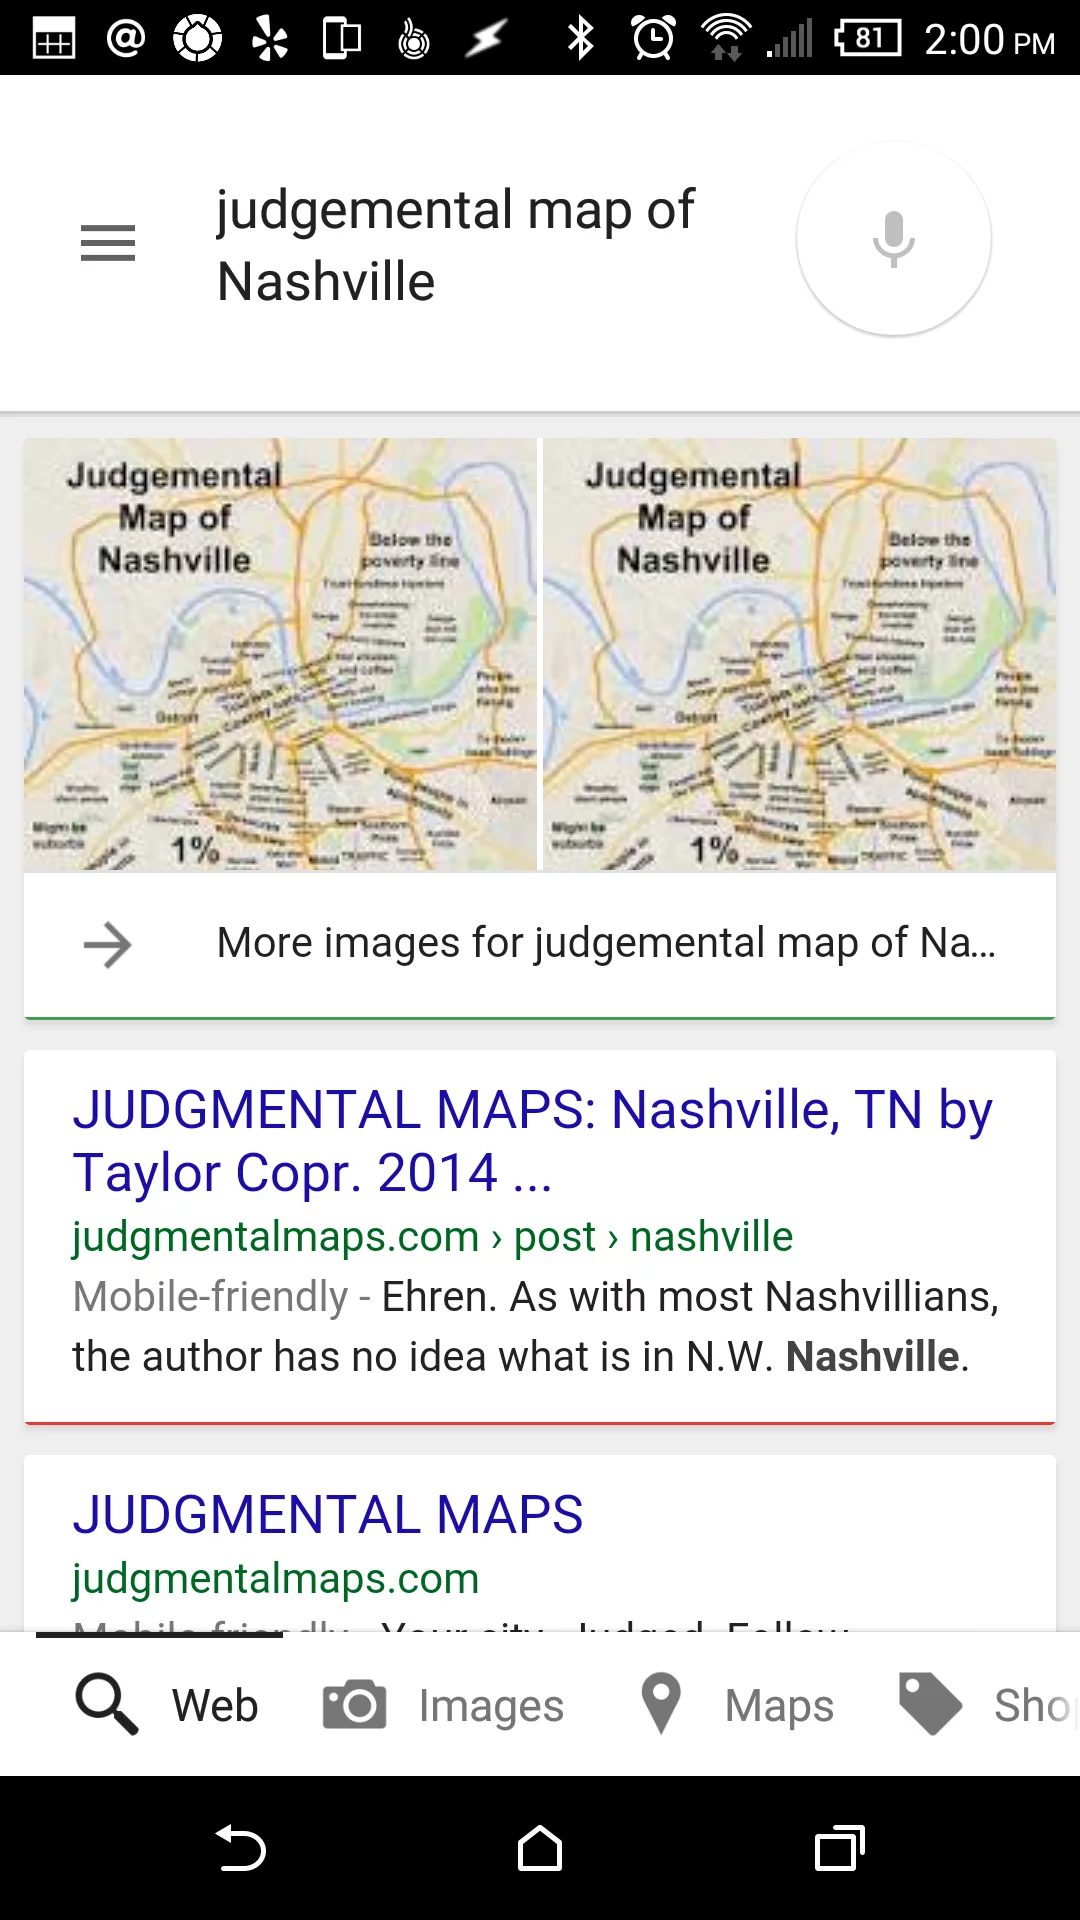 OK Google, what's this area judged by?